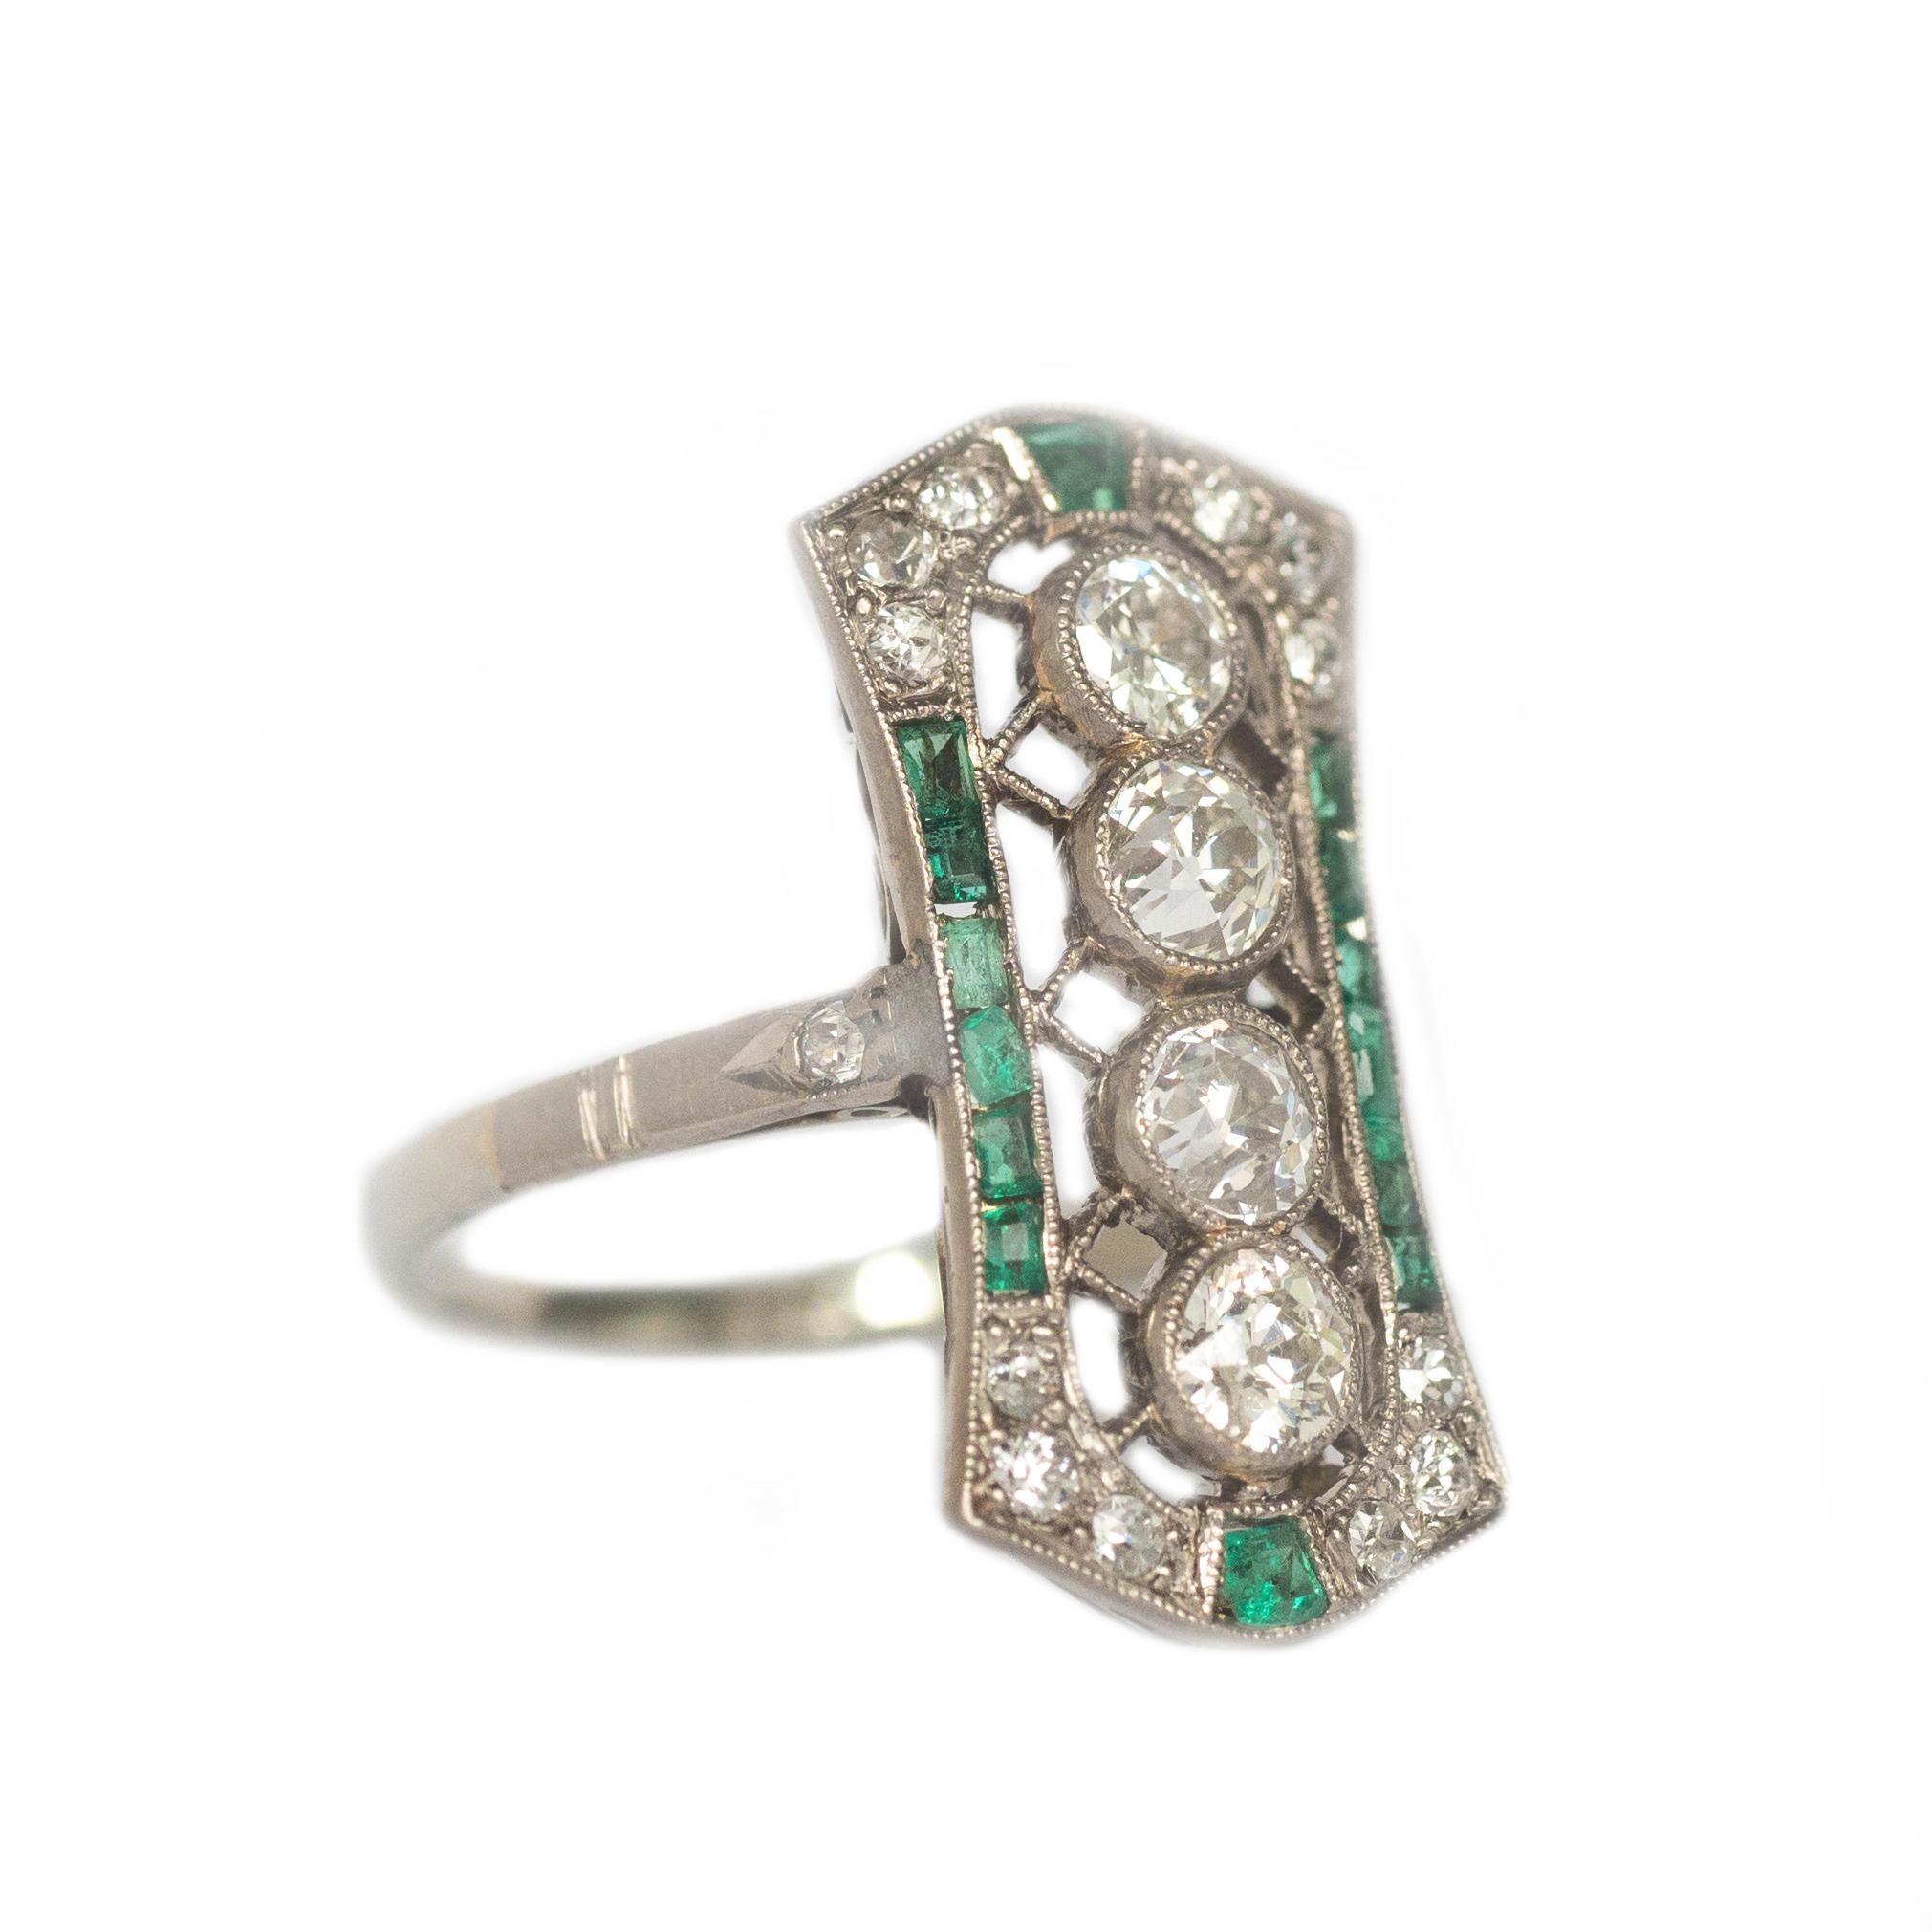 Item Details: 
Ring Size: 5
Metal Type: 14 karat Yellow Gold [Tested]
Weight: 3.4 grams

Diamond Details: 
Shape: Old European Brilliant
Total Carat Weight: 1.00 carat, total weight
Color: I 
Clarity: SI

Color Stone Details: 
Type: Emerald,